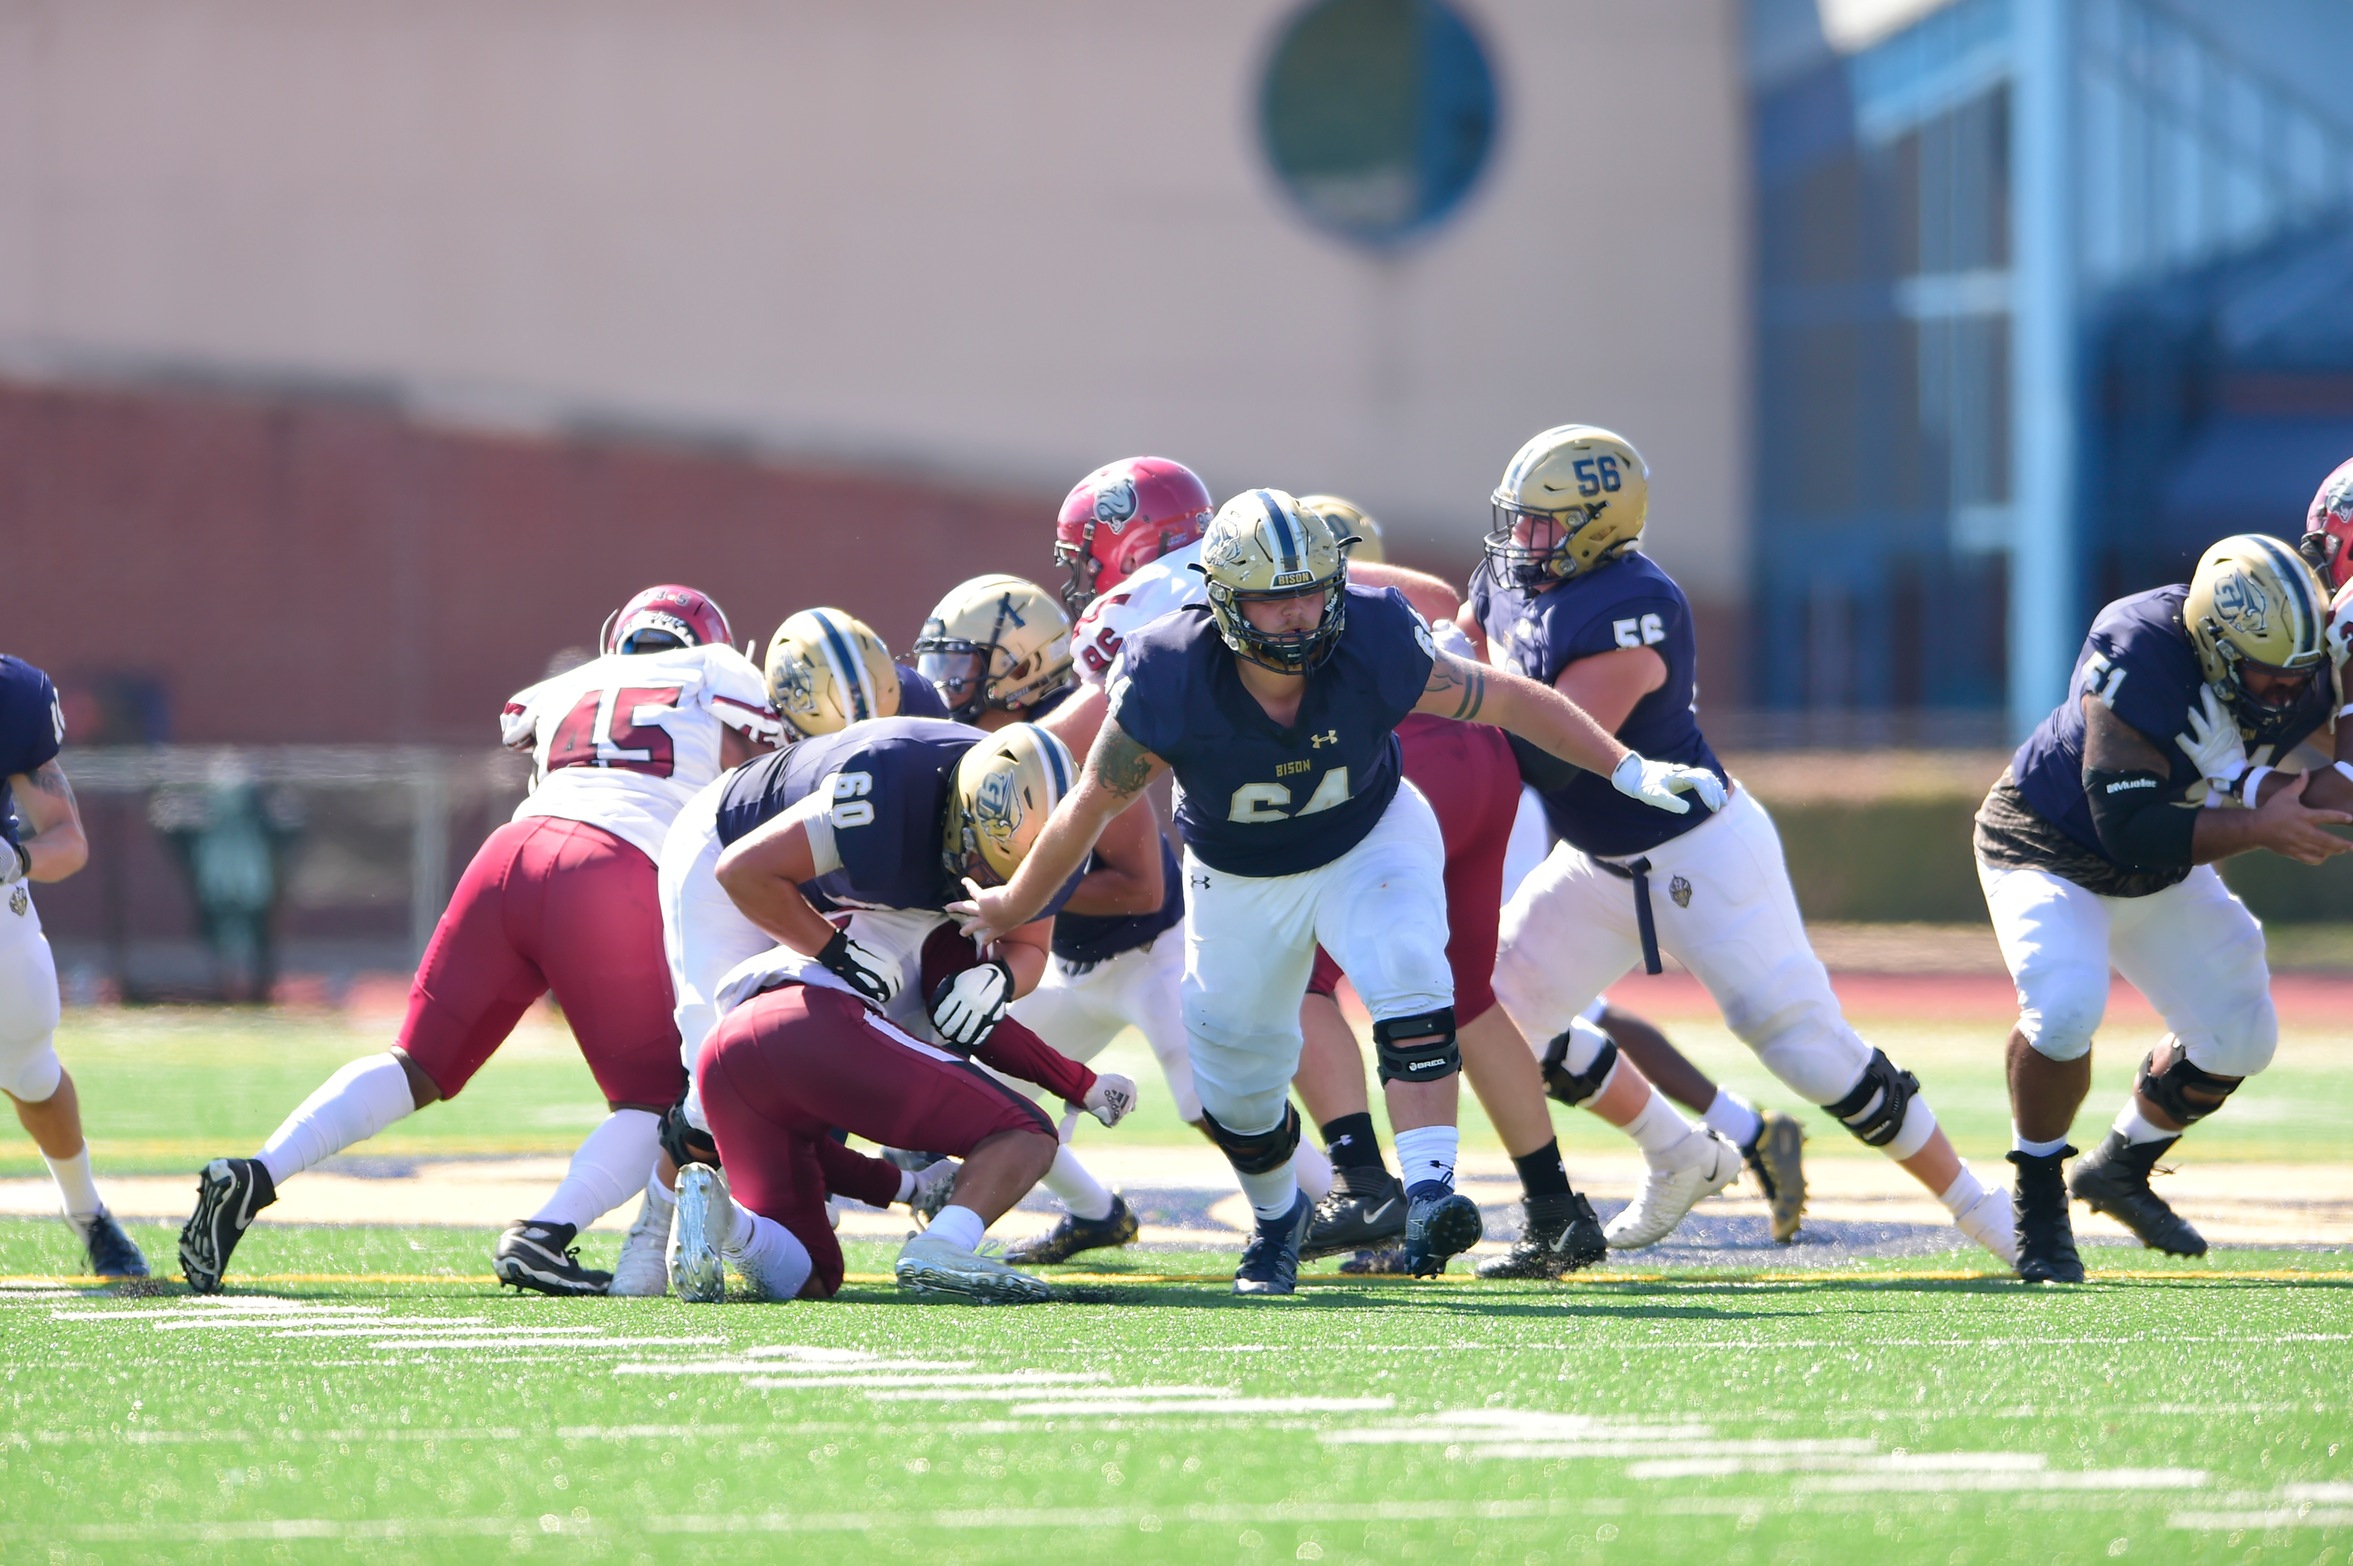 Gallaudet's Offensive Line Highlighted on D3football.com's Team of the Week